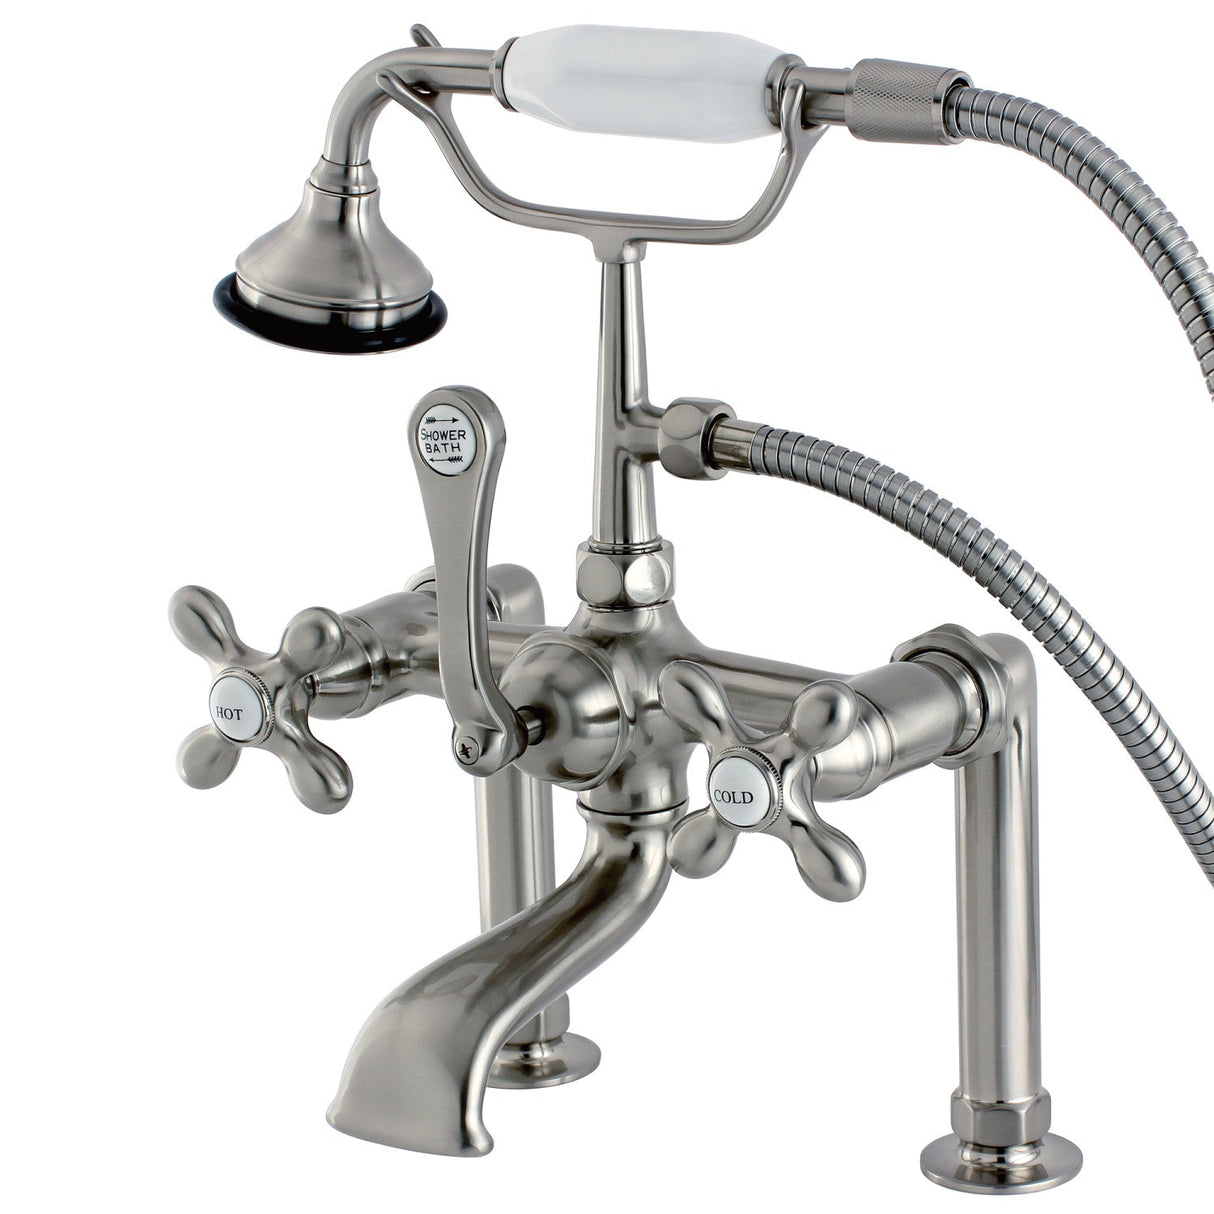 Aqua Vintage AE109T8 Three-Handle 2-Hole Deck Mount Clawfoot Tub Faucet with Hand Shower, Brushed Nickel